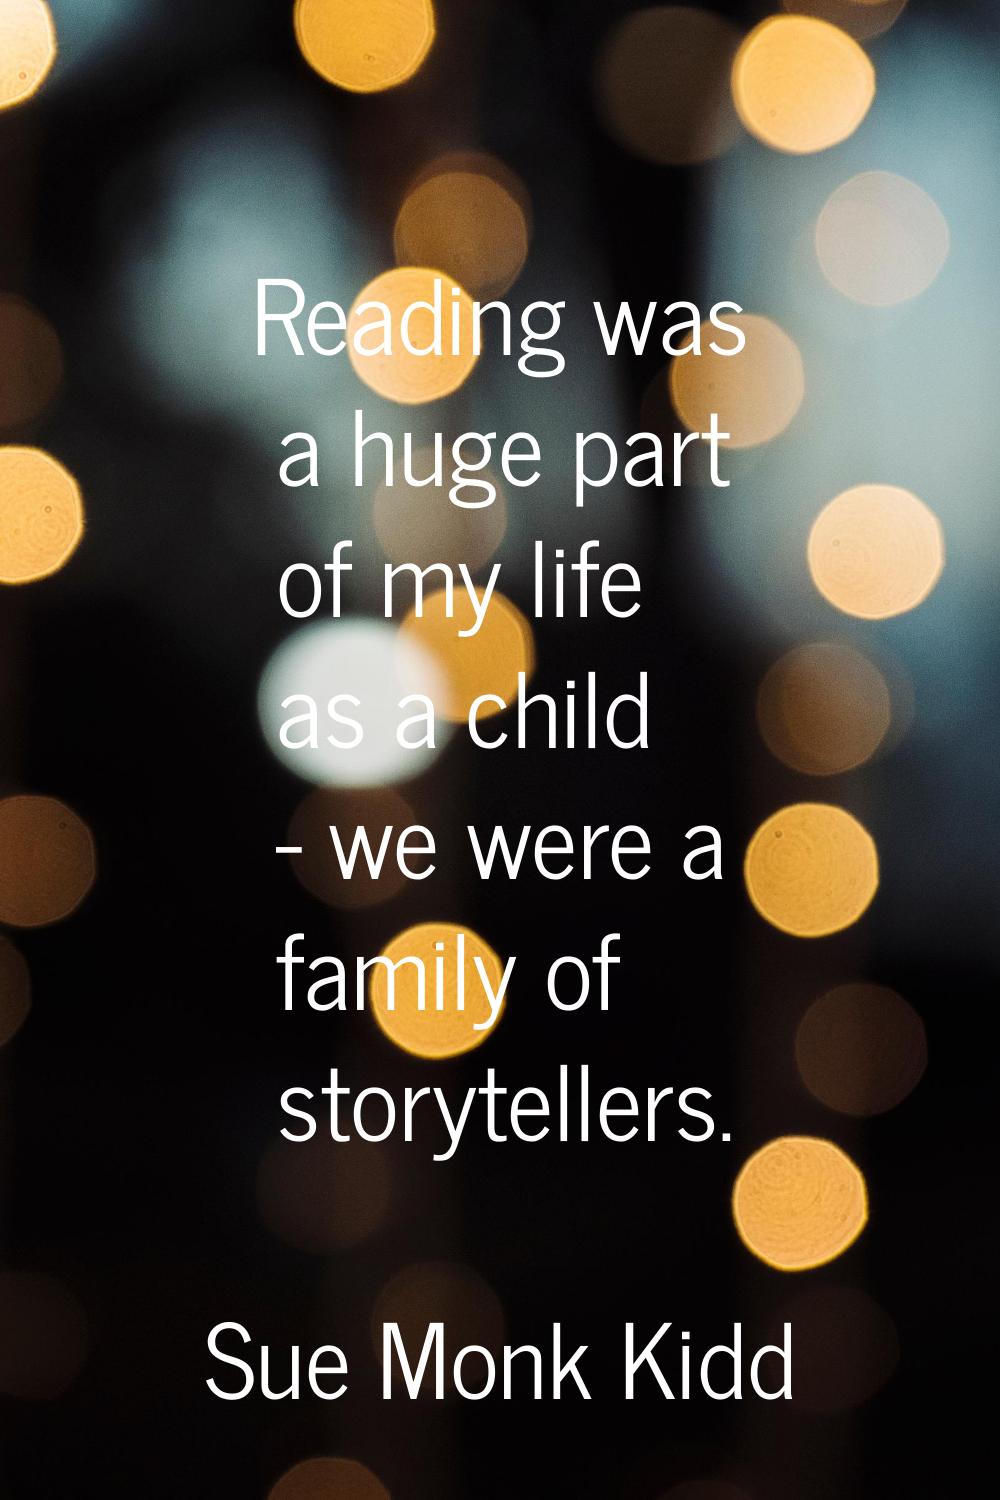 Reading was a huge part of my life as a child - we were a family of storytellers.